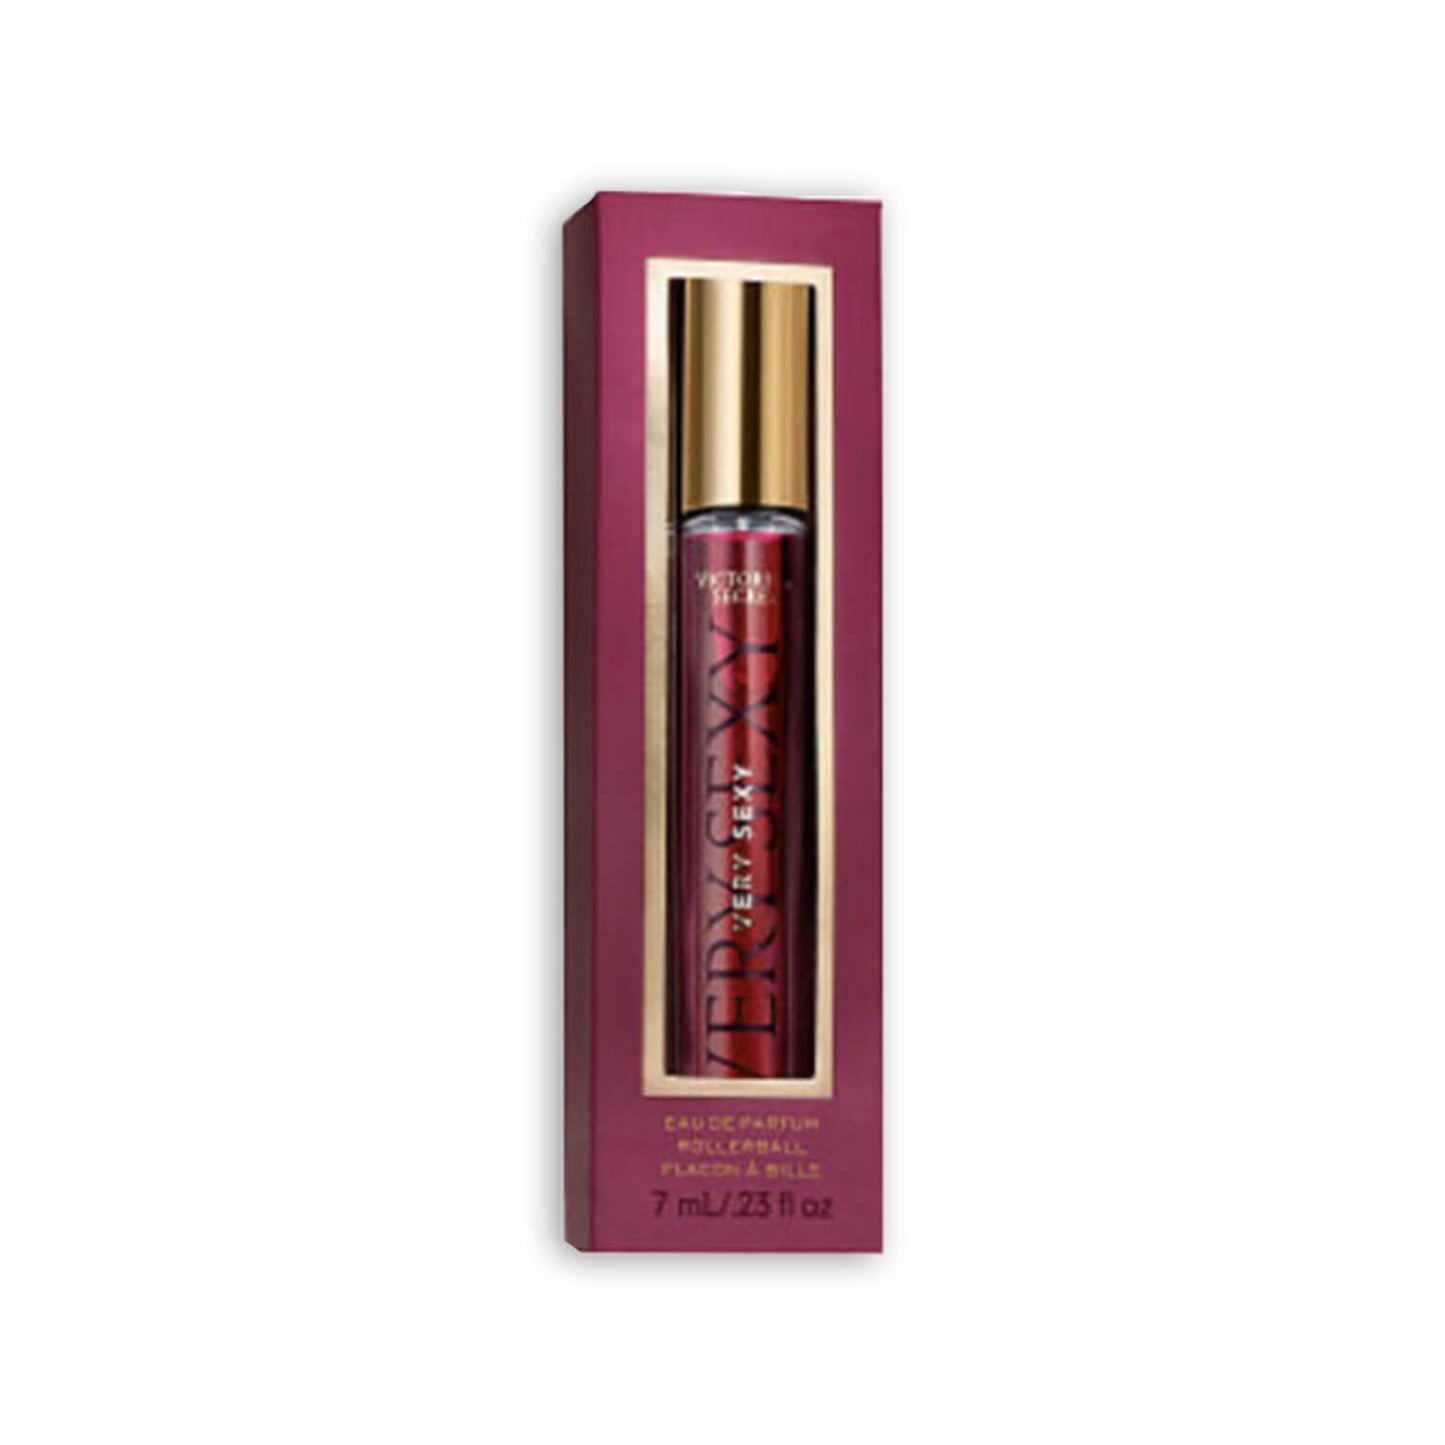 victoria secret very sexy perfume rollerball available at heygirl.pk for delivery in Pakistan